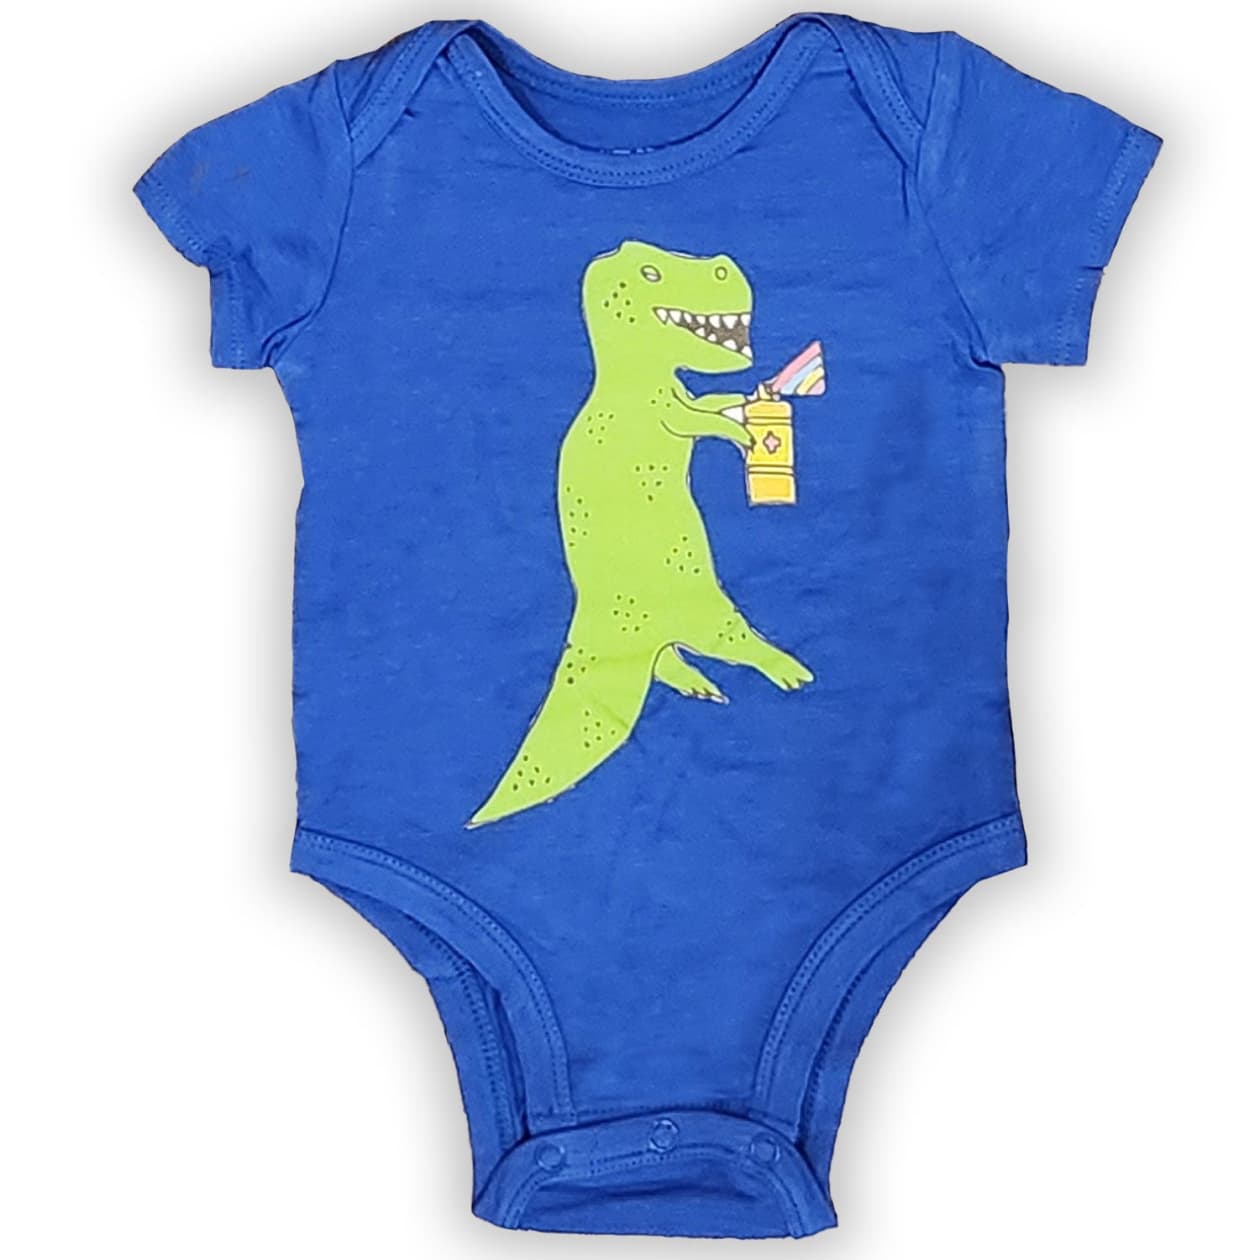 The Everyday Graphic Baby Onesie: Graffiti Dino - Size: 6-9 months